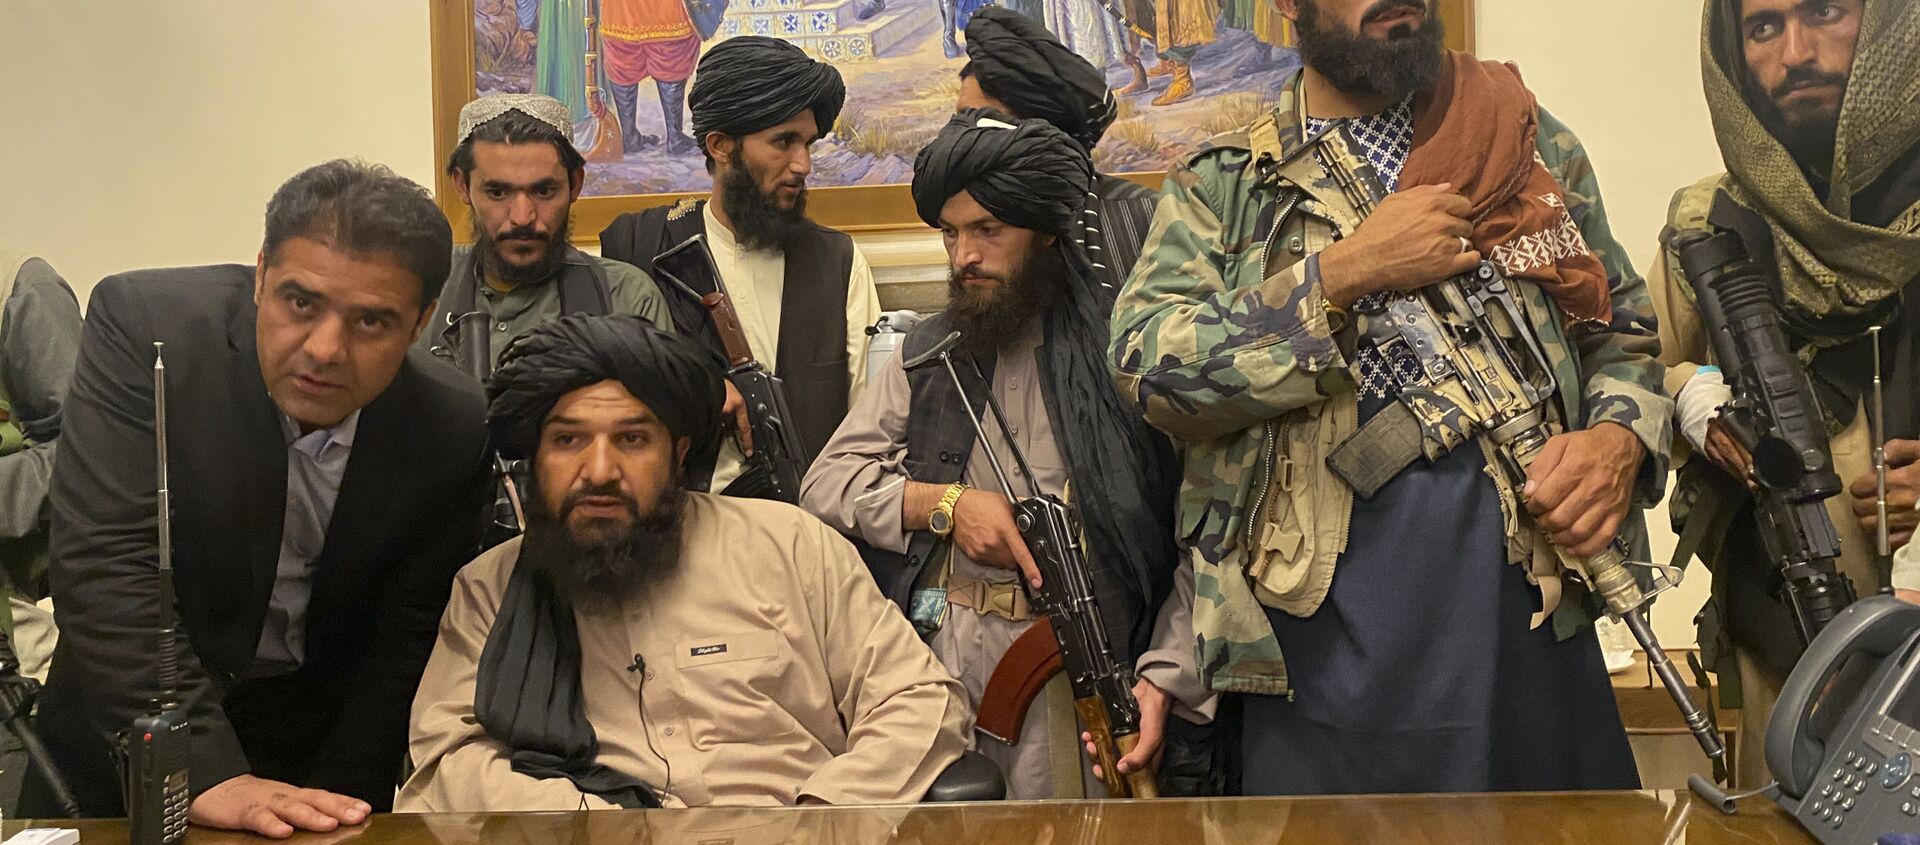 Taliban fighters take control of Afghan presidential palace after the Afghan President Ashraf Ghani fled the country, in Kabul, Afghanistan, Sunday, Aug. 15, 2021. - Sputnik International, 1920